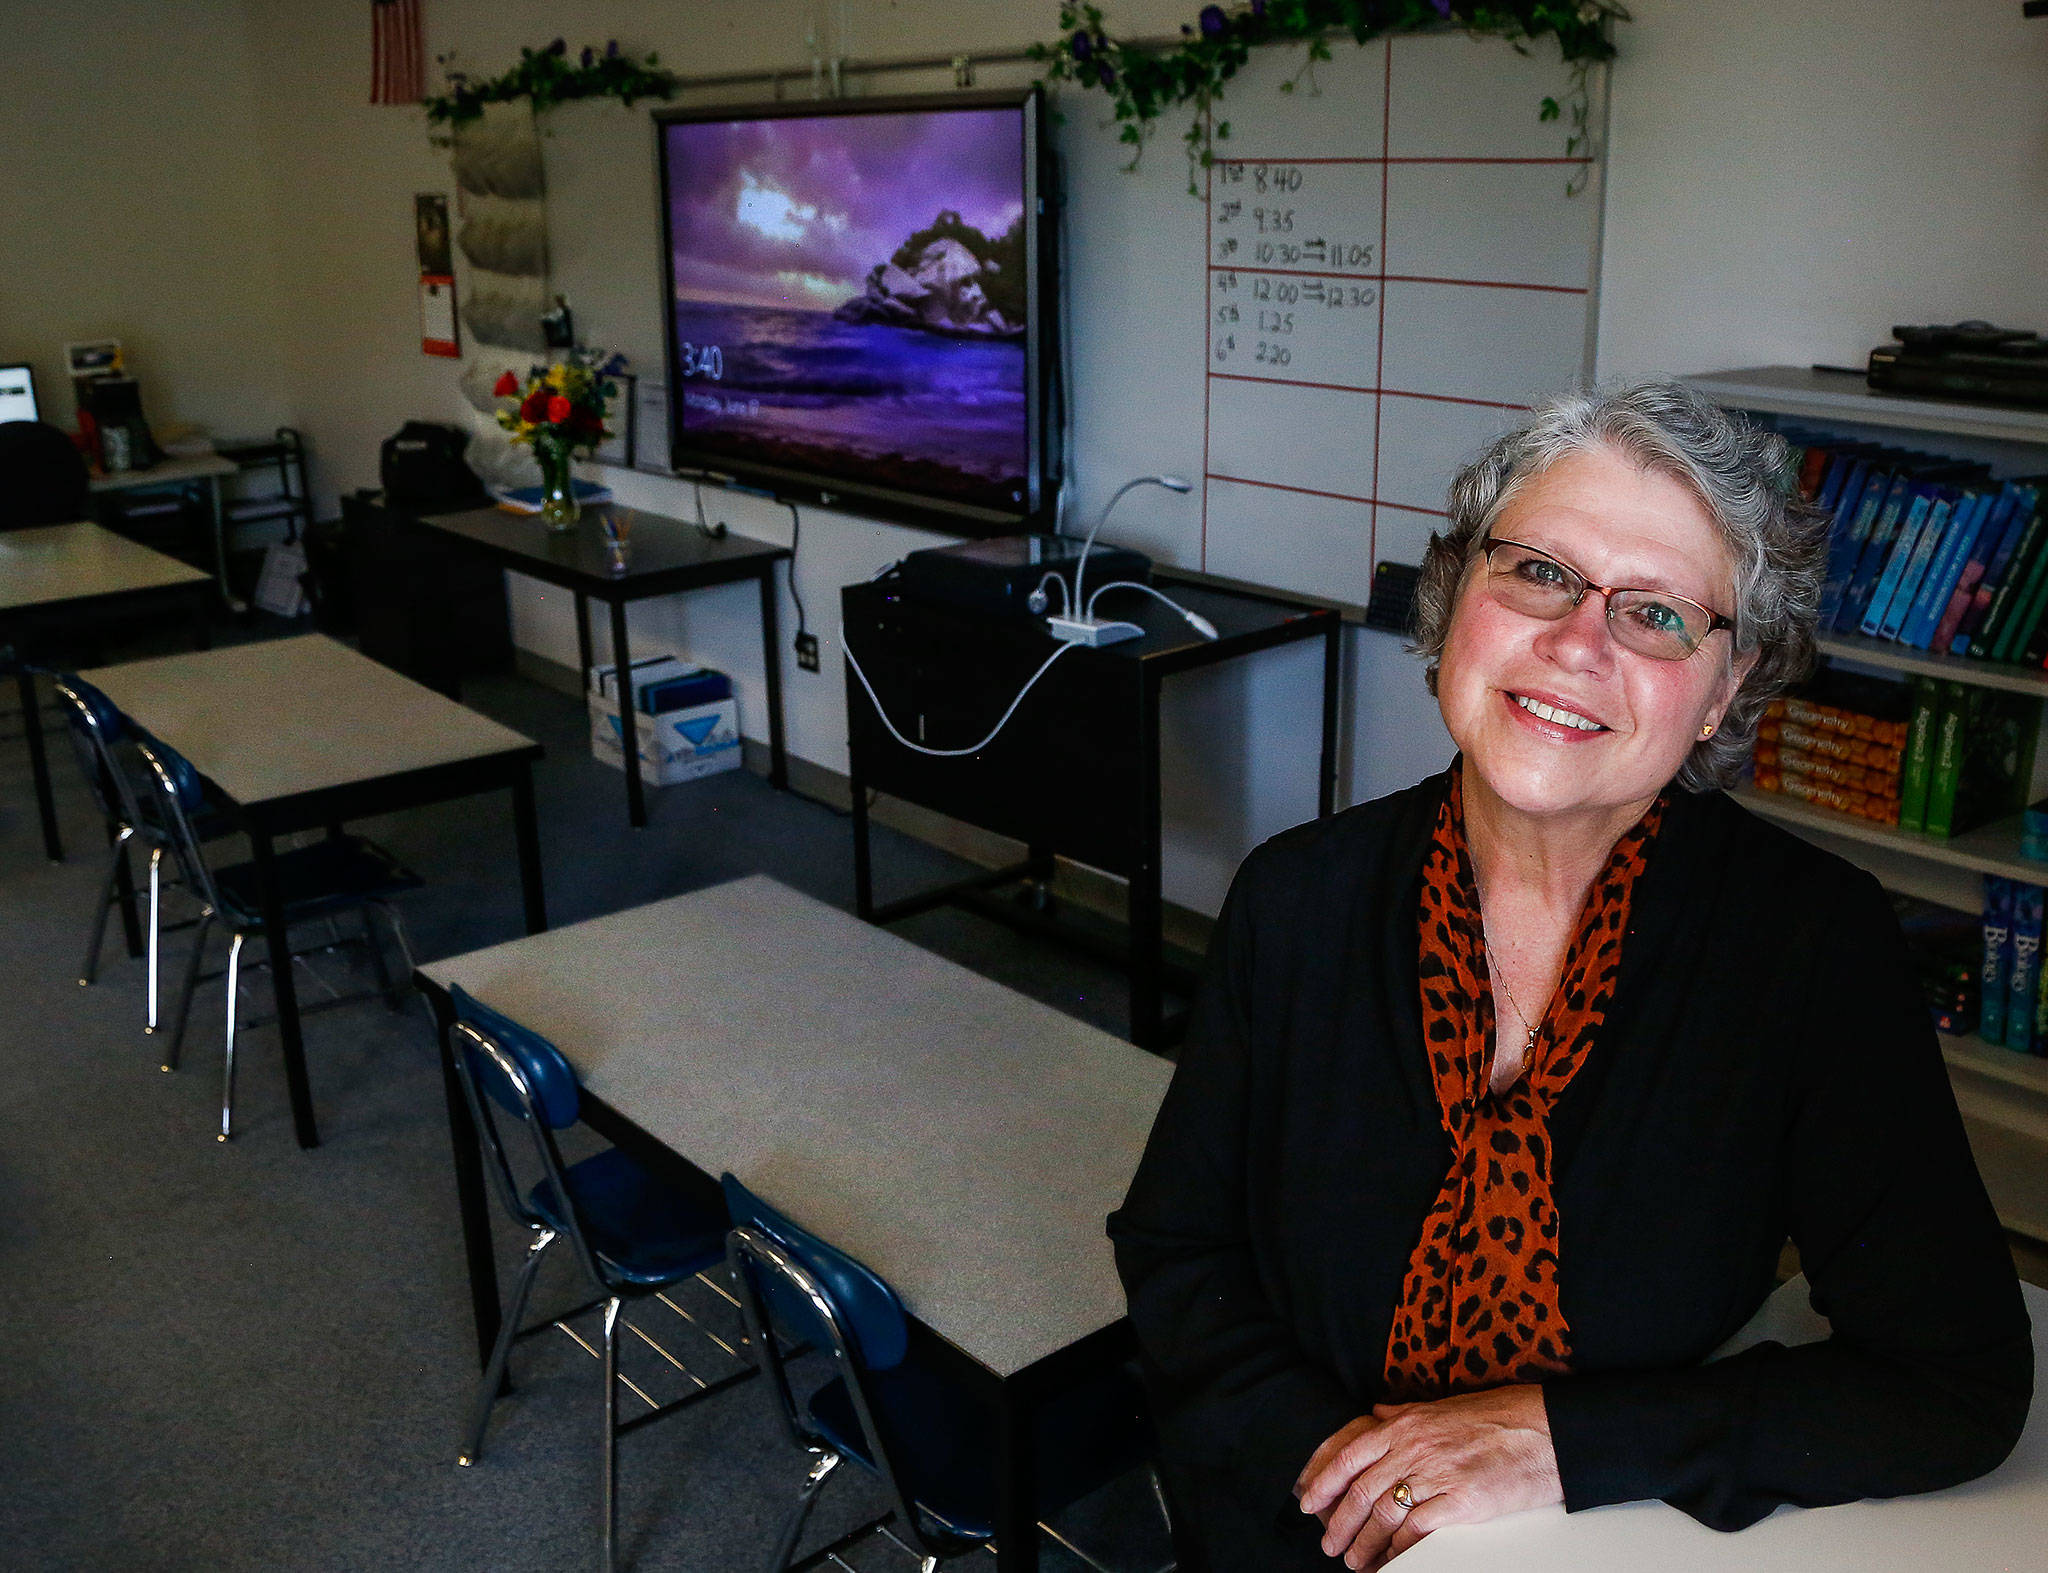 Monroe High School’s Susan Dow is retiring after four decades teaching special education. “The children are the gift,” she said. (Dan Bates / The Herald)